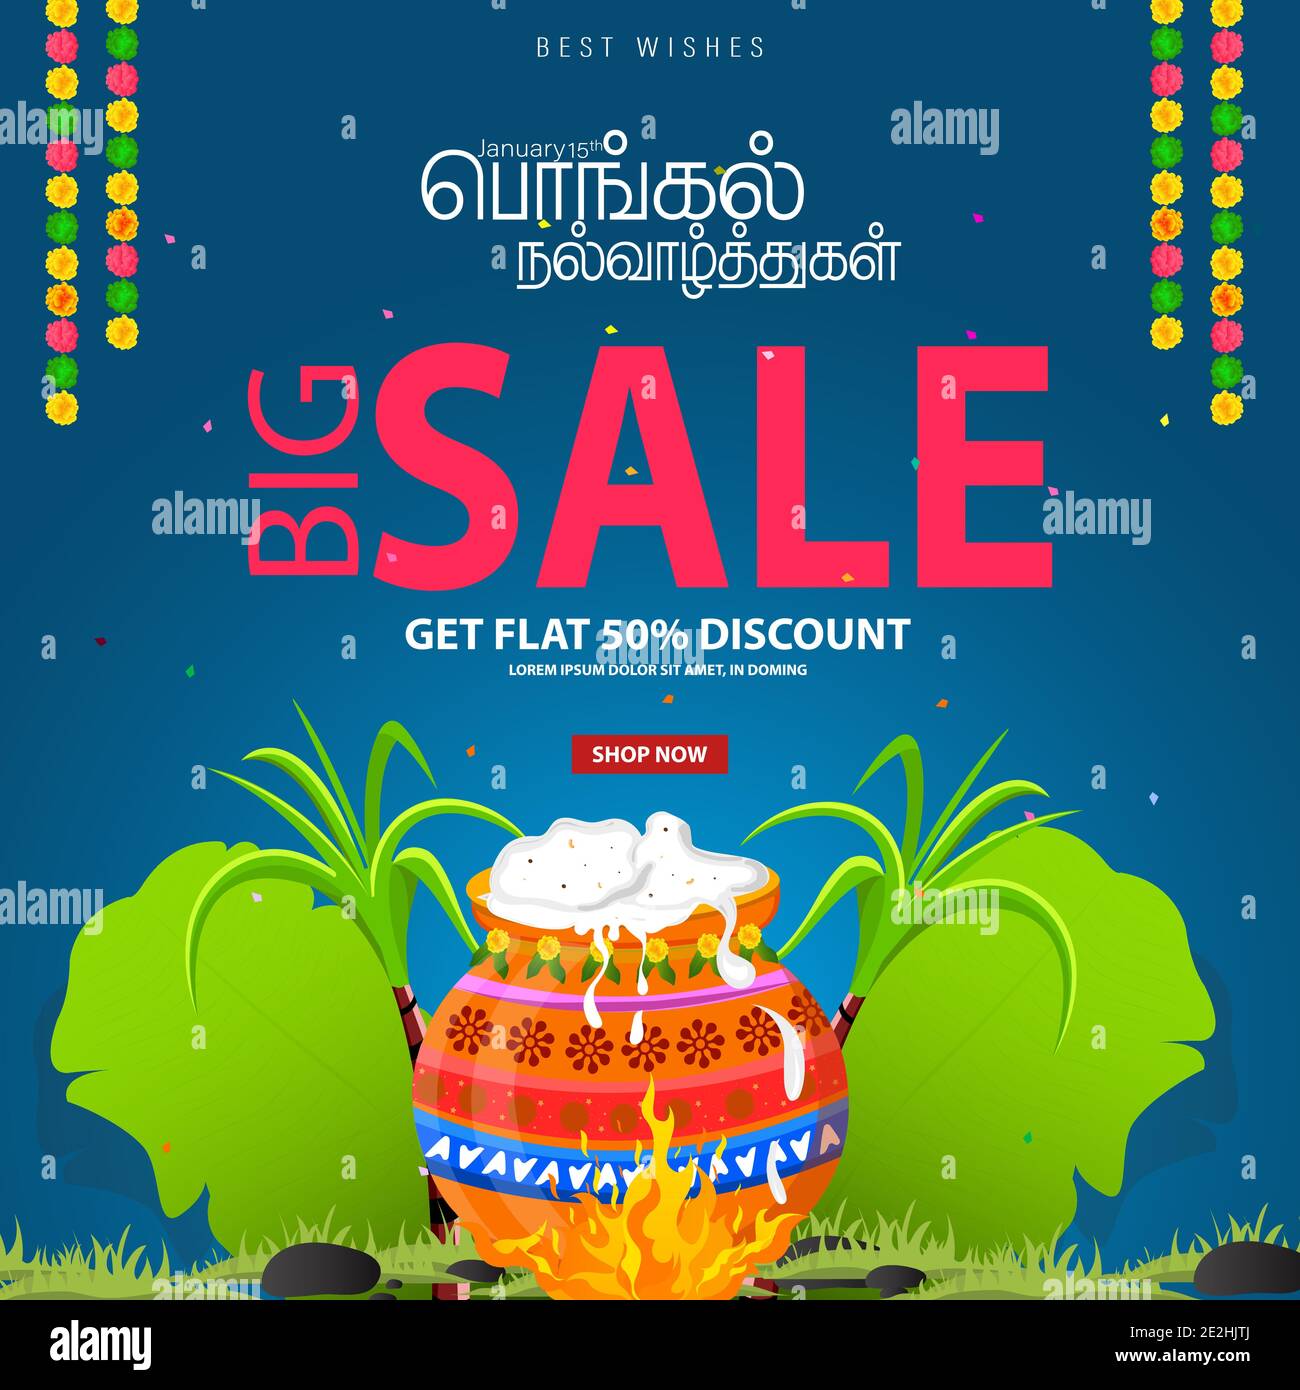 Happy Pongal Holiday Design of Indian Festival with Big Sale Offer. Stock Vector